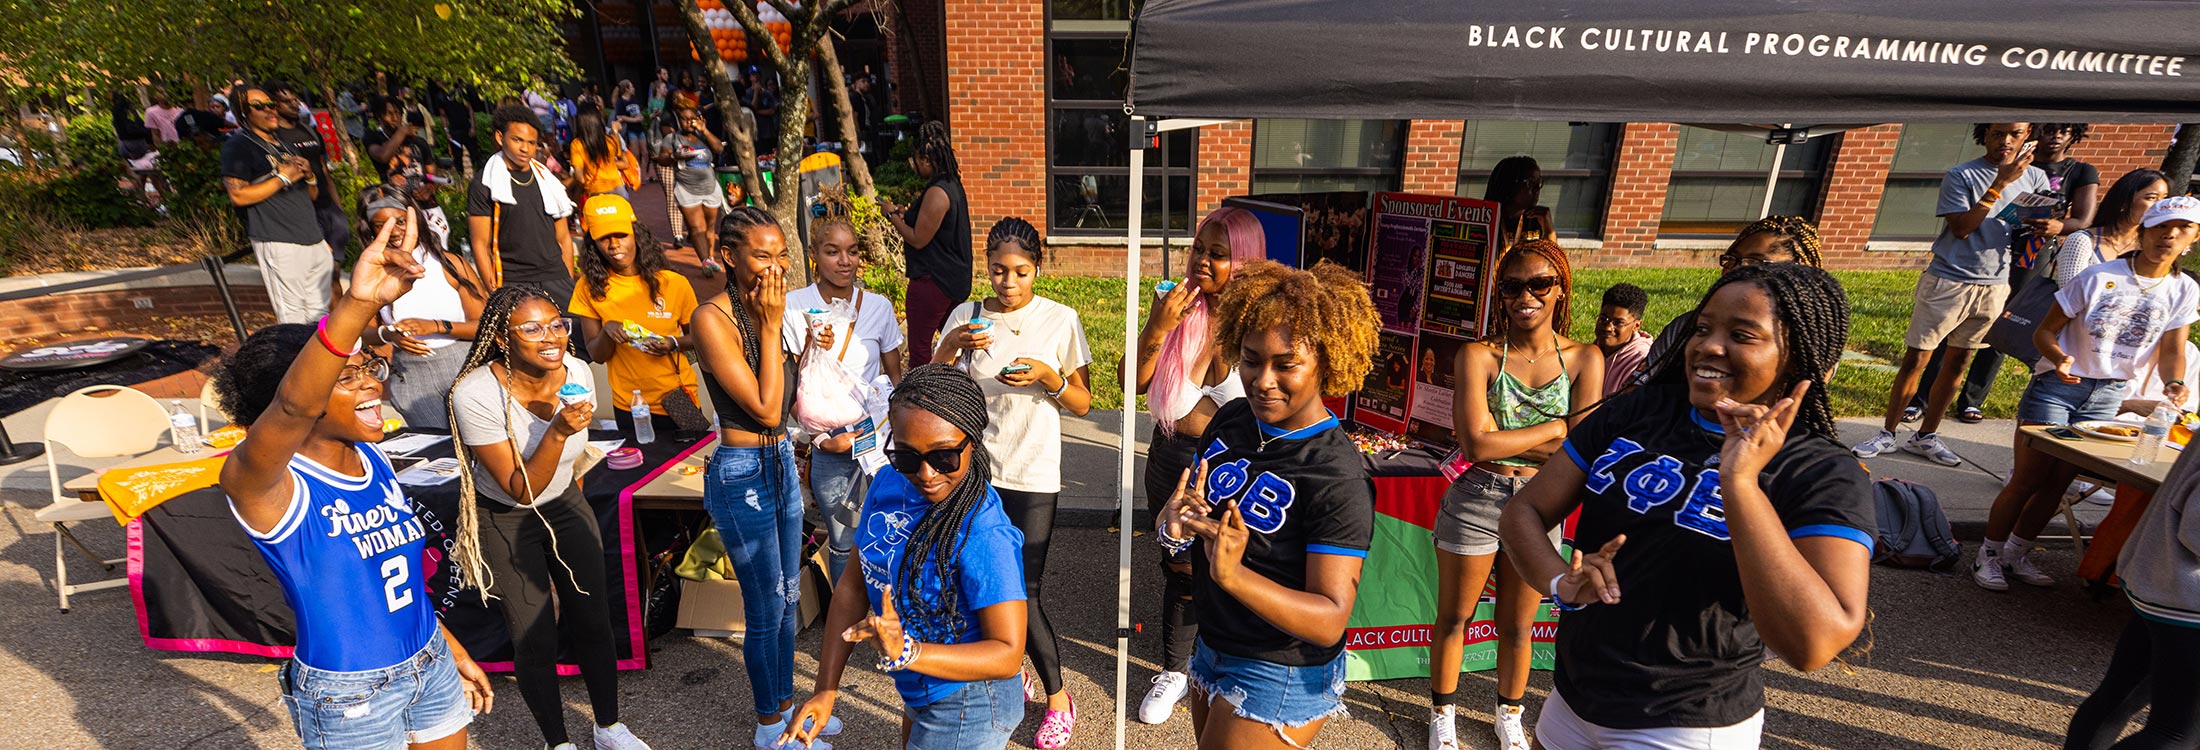 Students dancing in front of a student organization fair display.